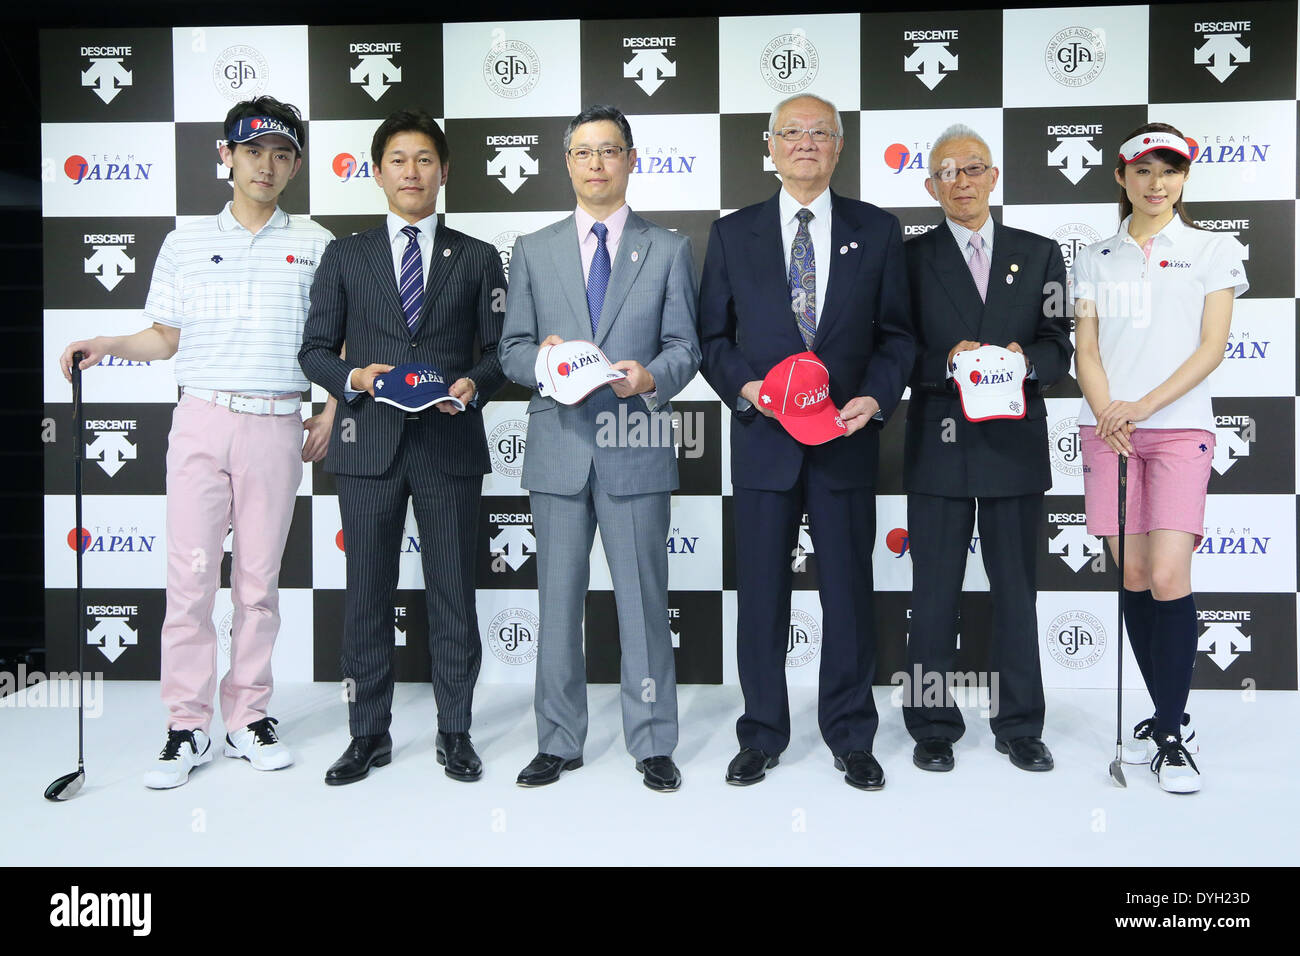 (L-R) Hajime Takechi, Masatoshi Ishimoto, Takayuki Anzai, Keiji Nagata, APRIL 17, 2014 : A press conference about Japanese sports brand DESCENTE at Tokyo, Japan. DESCENTE made an official supplier agreement with Japan Golf Association (JGA) and started their new brand 'DESCENTE GOLF'. Credit:  Yohei Osada/AFLO SPORT/Alamy Live News Stock Photo